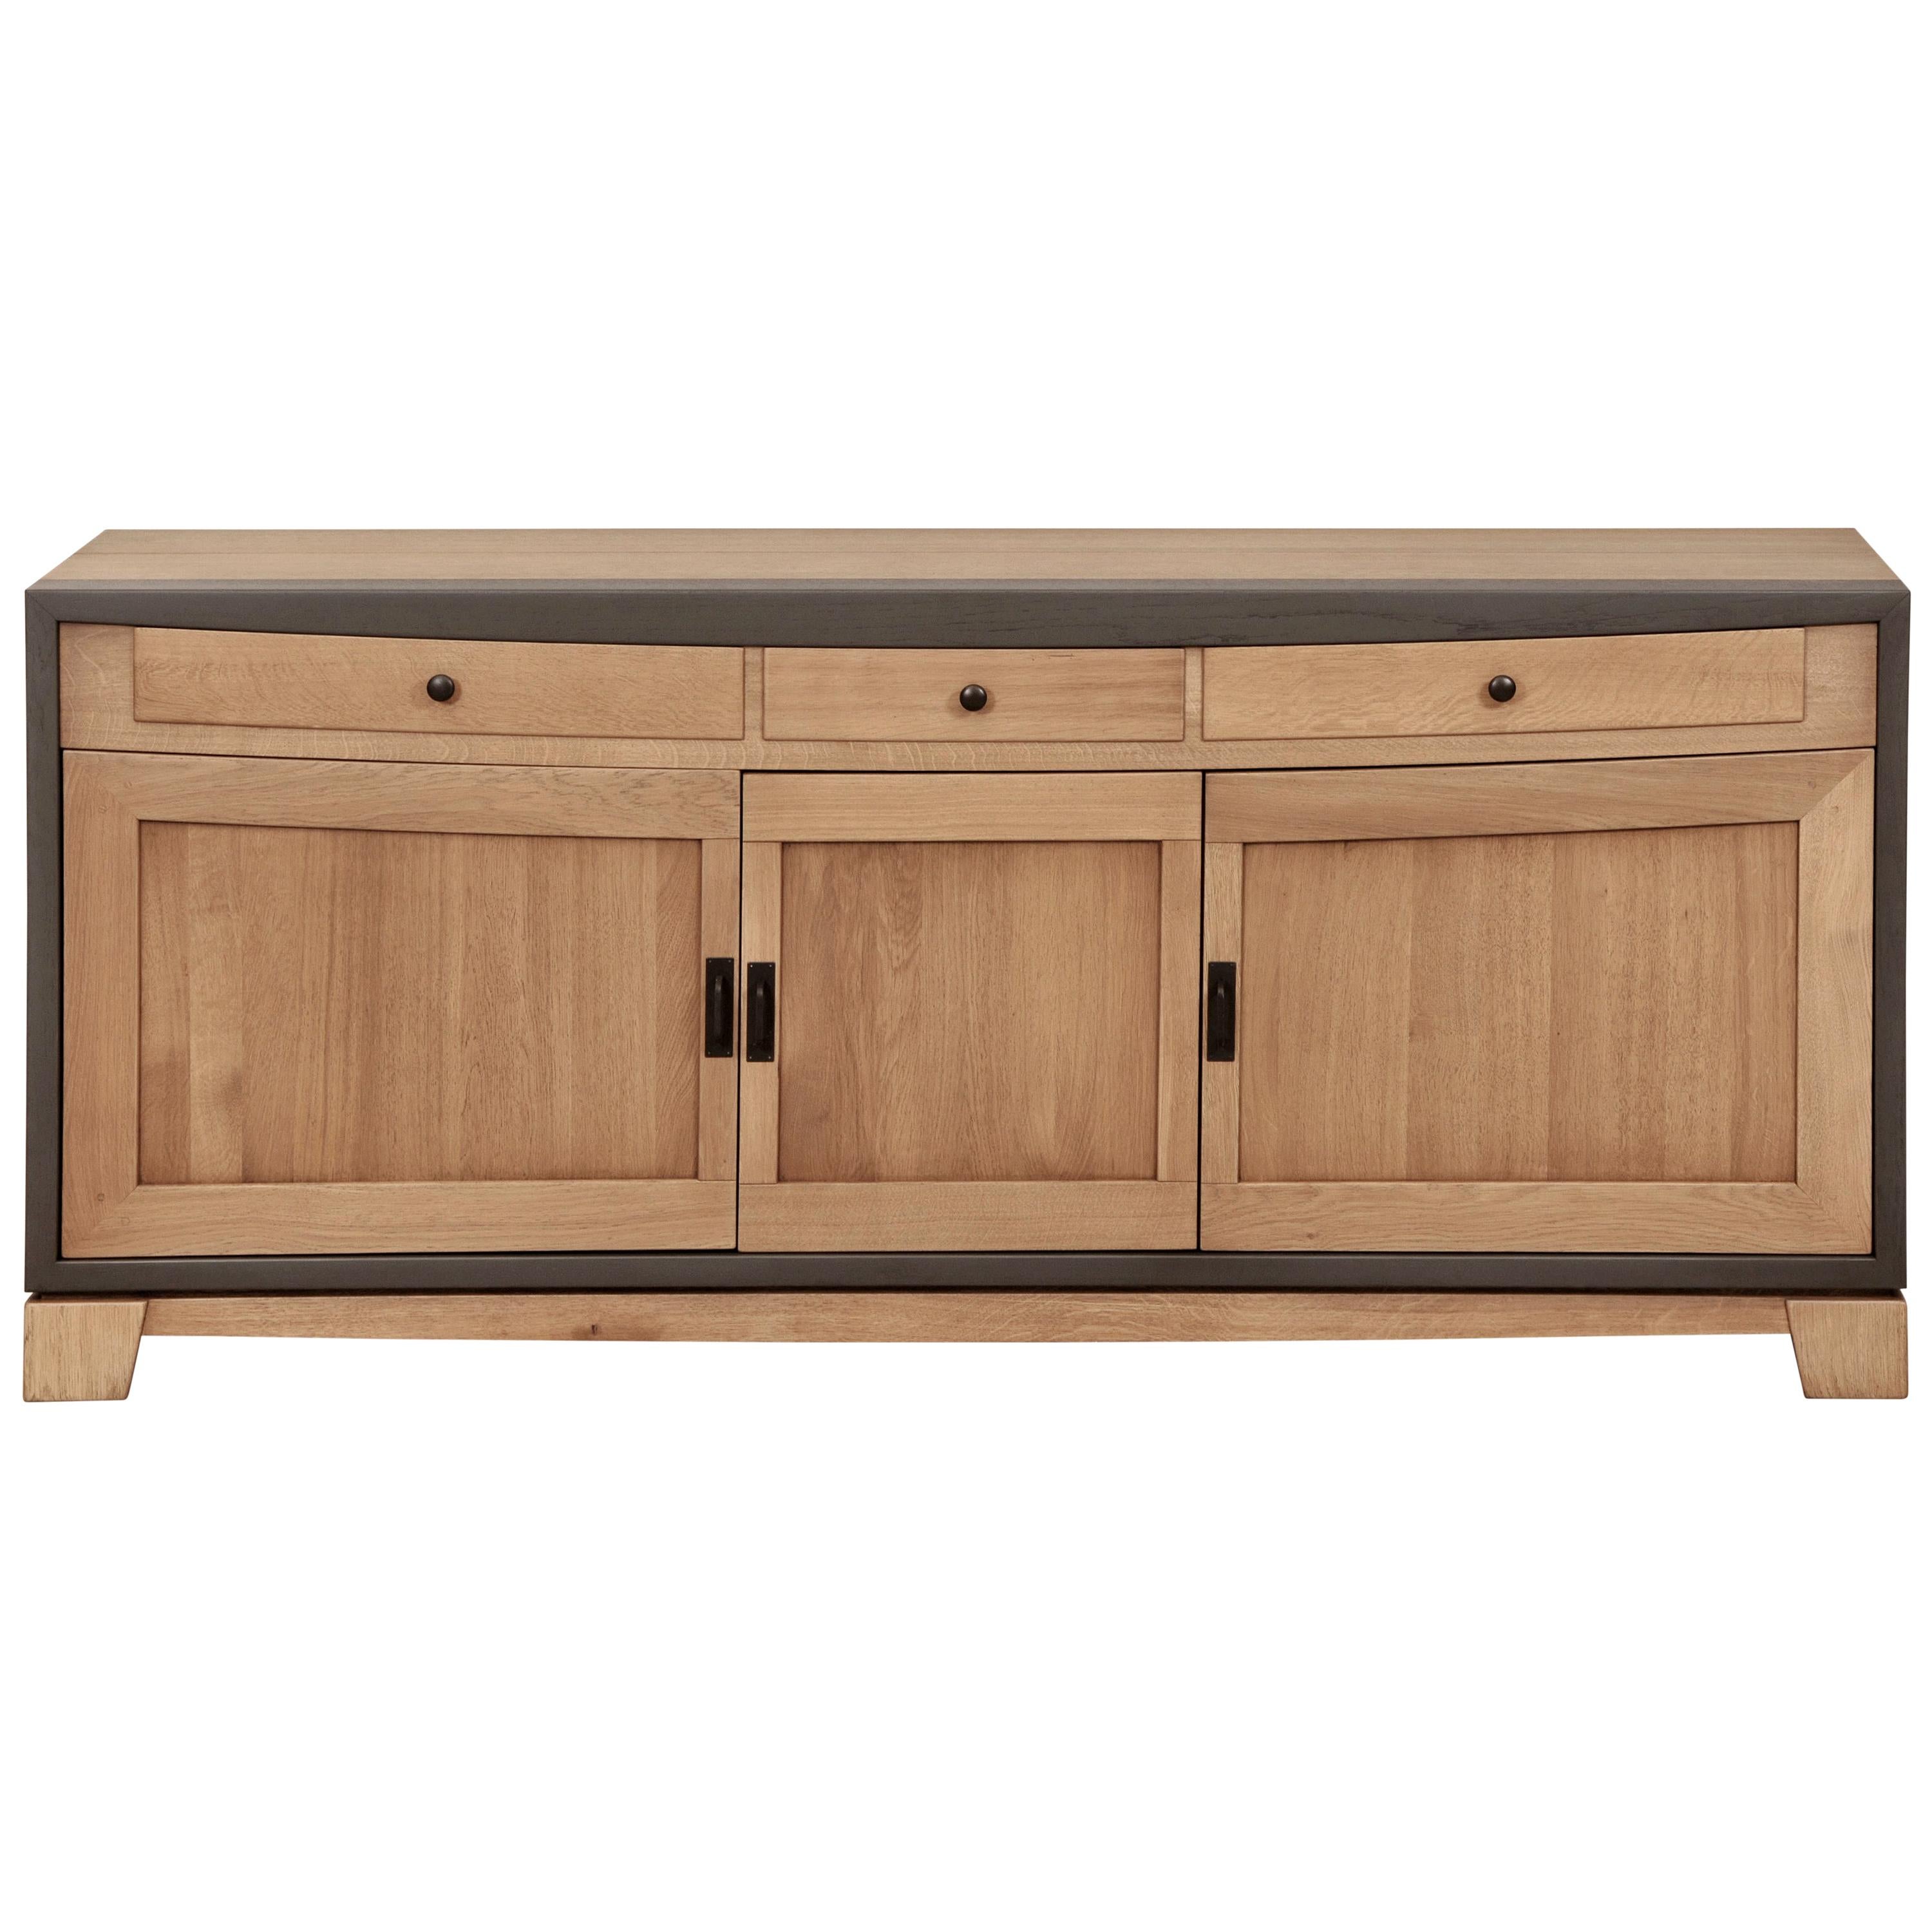 This 3 doors sideboard is made of French solid Oak and designed by the French Designer Christophe Lecomte. 

- 3 wooden doors with damped hinges 
- 1 inner partition for 2 storage units
- 1 wooden shelf on each side of the divider
- finish: chestnut